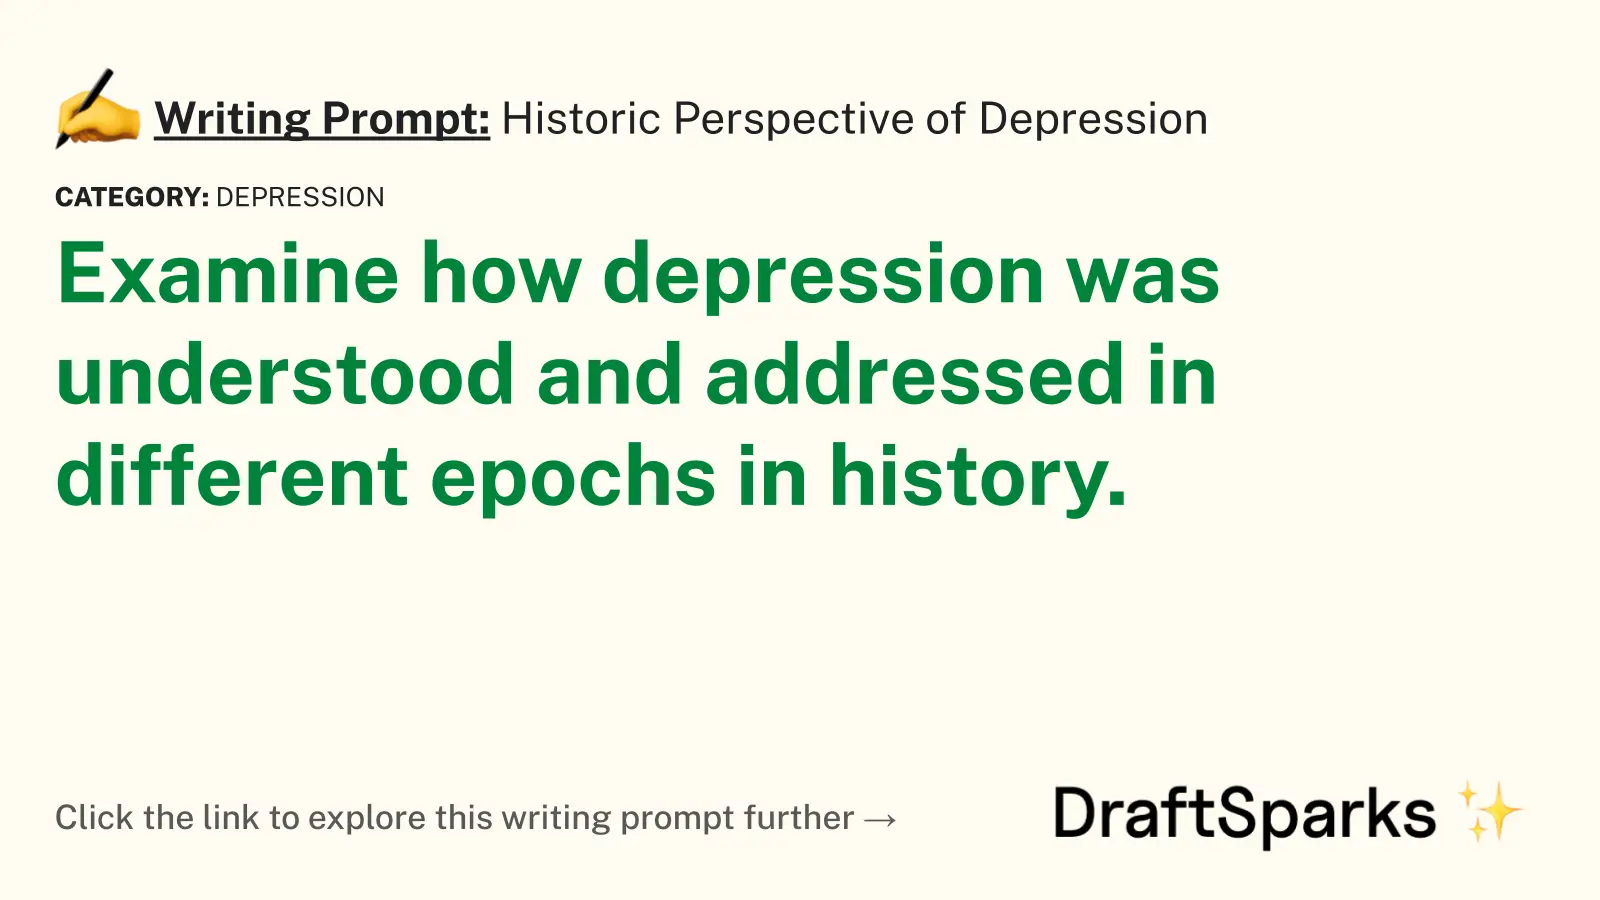 Historic Perspective of Depression